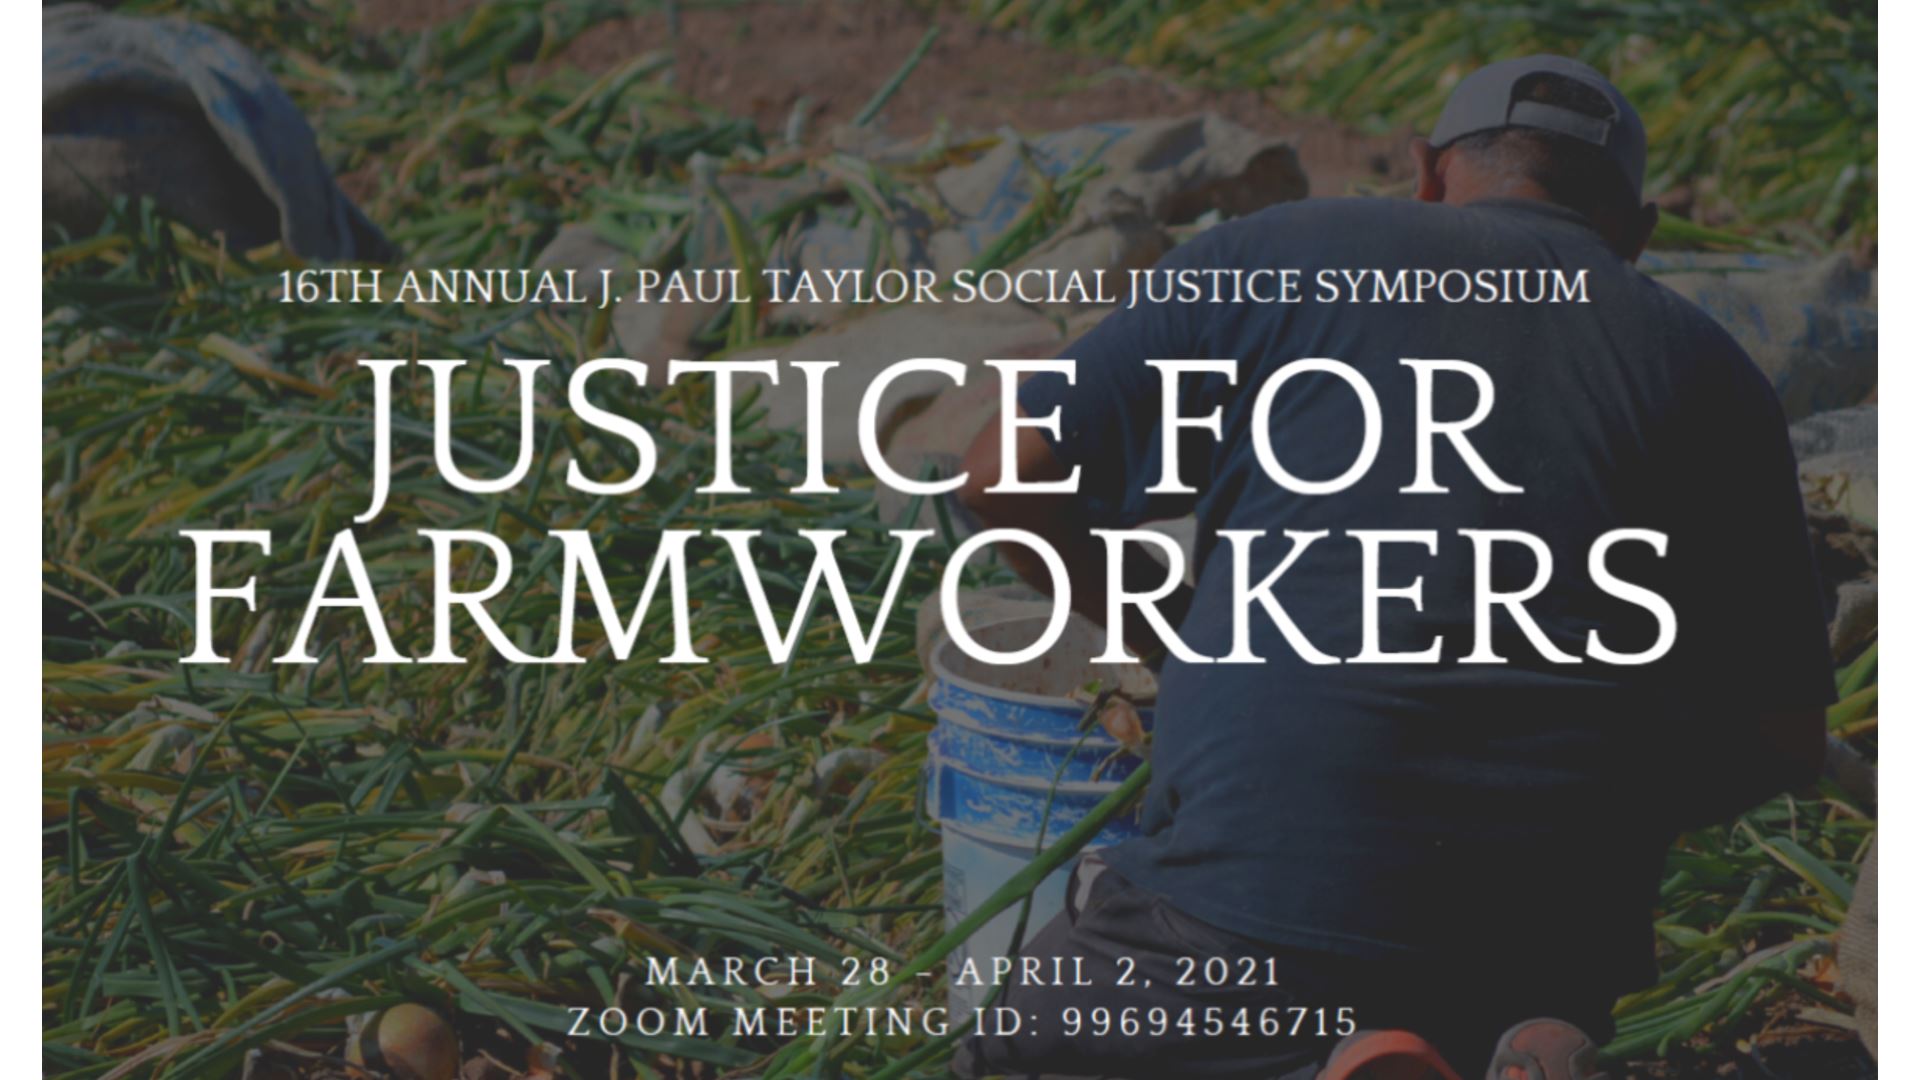 16th annual J. Paul Taylor Social Justice Symposium to focus on farmworkers